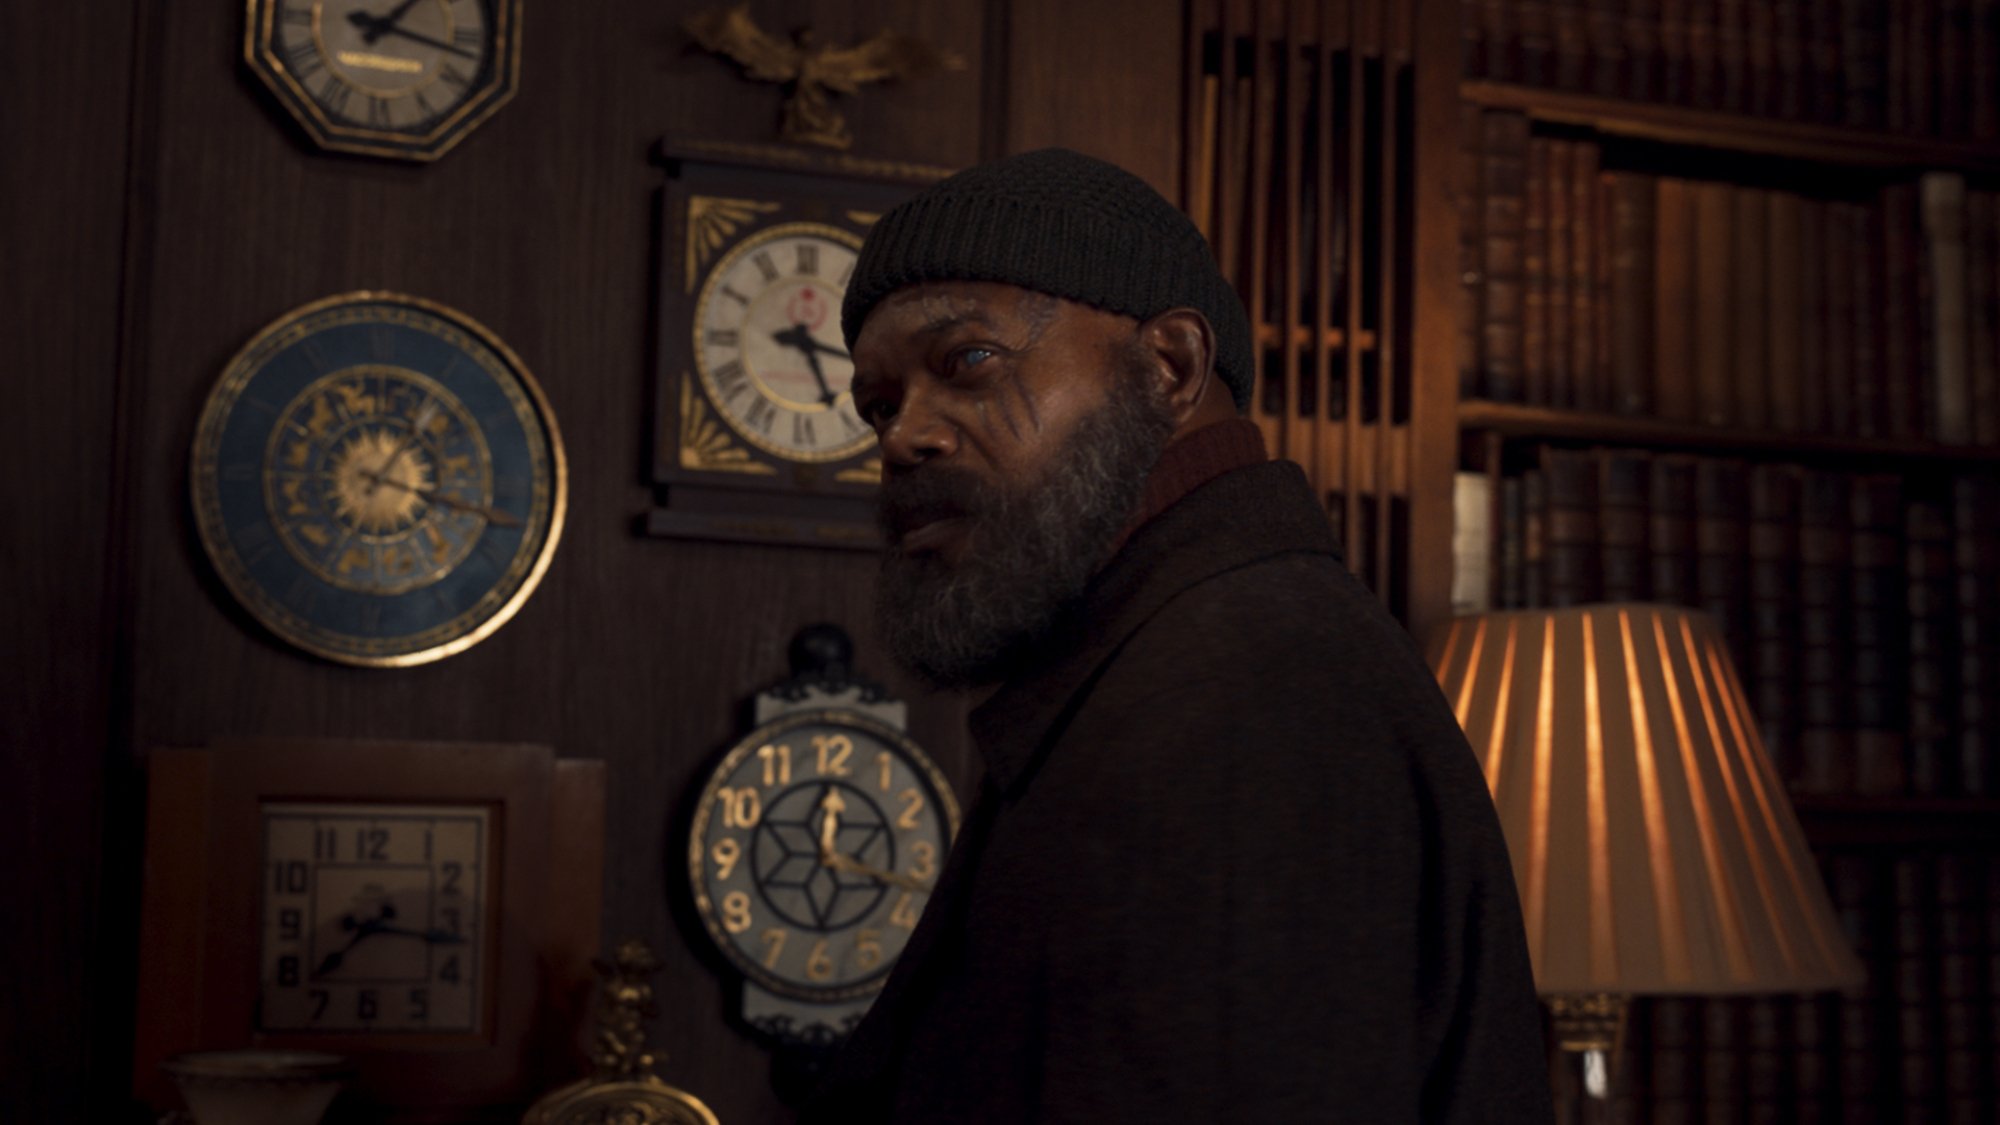 In the Marvel series "Secret Invasion" Samuel L. Jackson's character Nick Fury stands in a study filled with clocks.